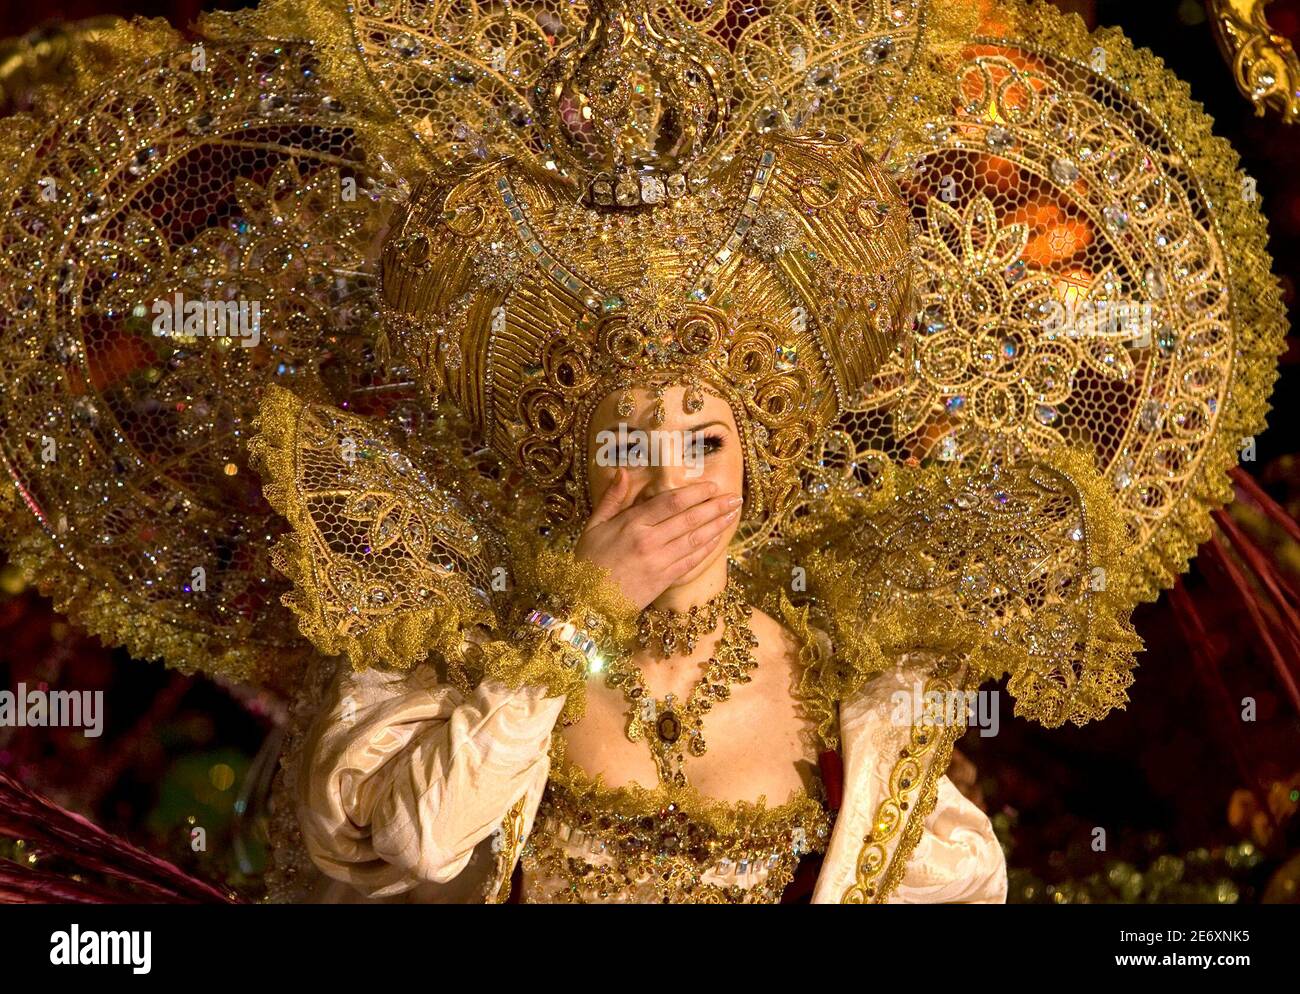 Tenerife's Carnival Queen Nauzet Celeste Cruz Melo reacts during the gala  for the election of the Queen in Santa Cruz de Tenerife, capital of the  Spanish Canary Island of Tenerife, January 30,